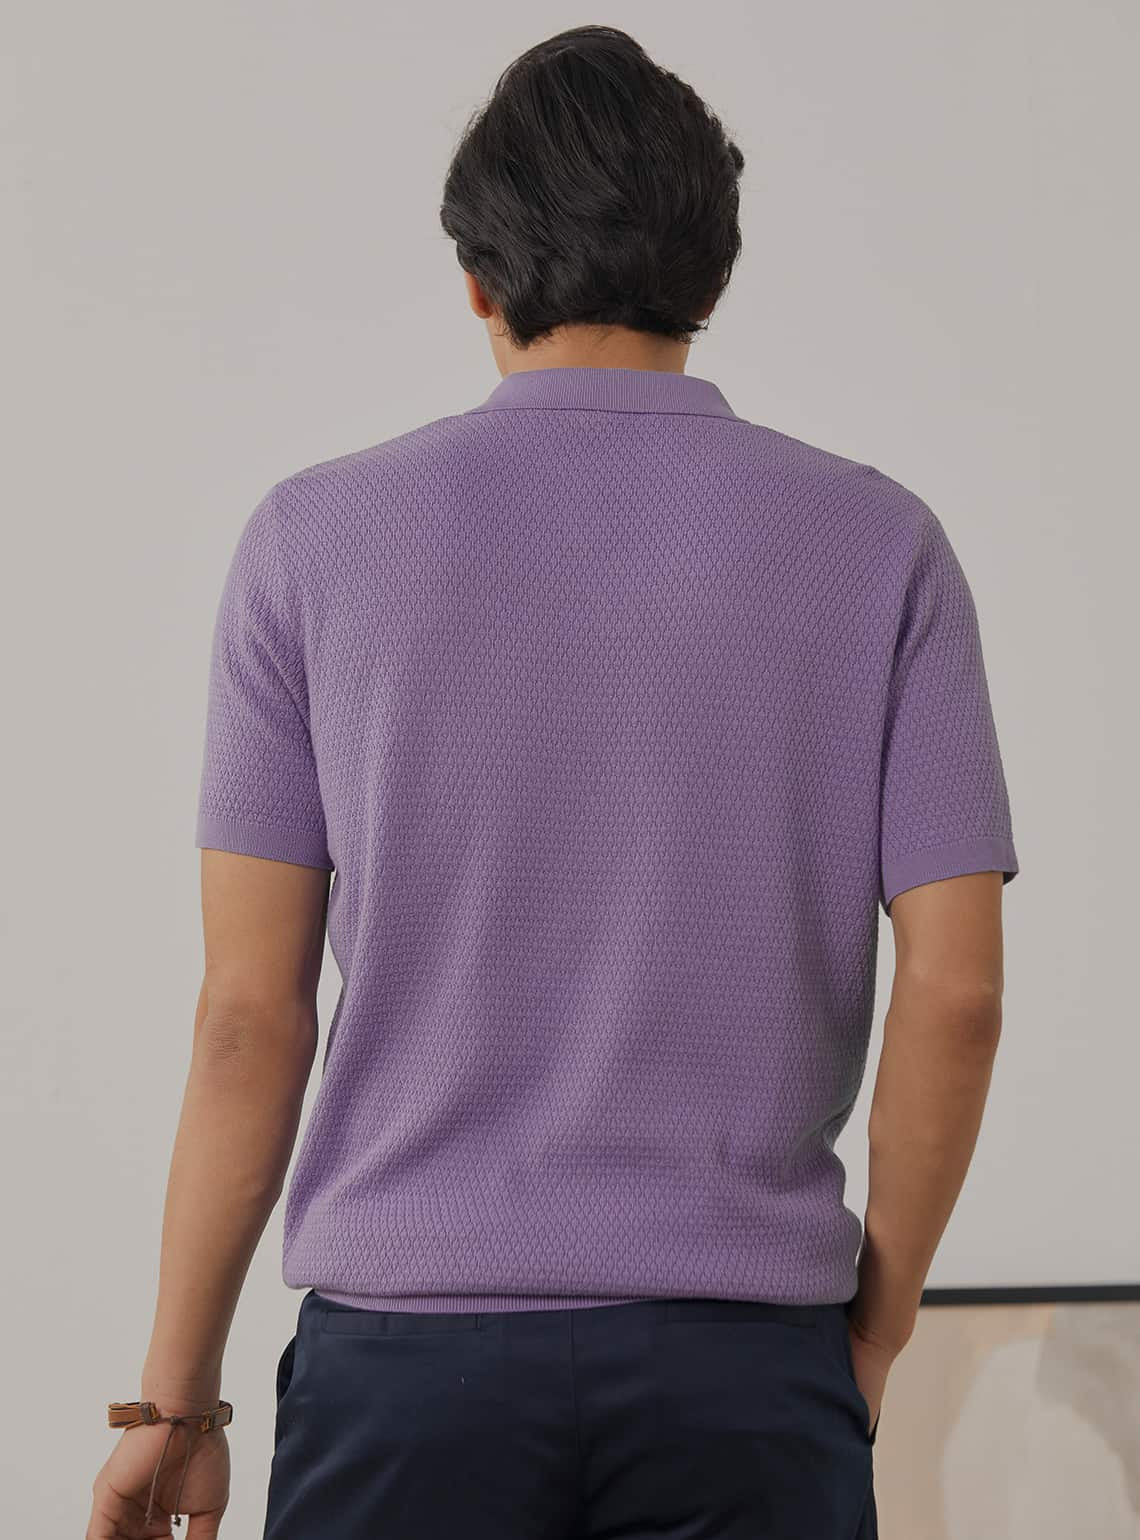 Amethyst Structured Polo